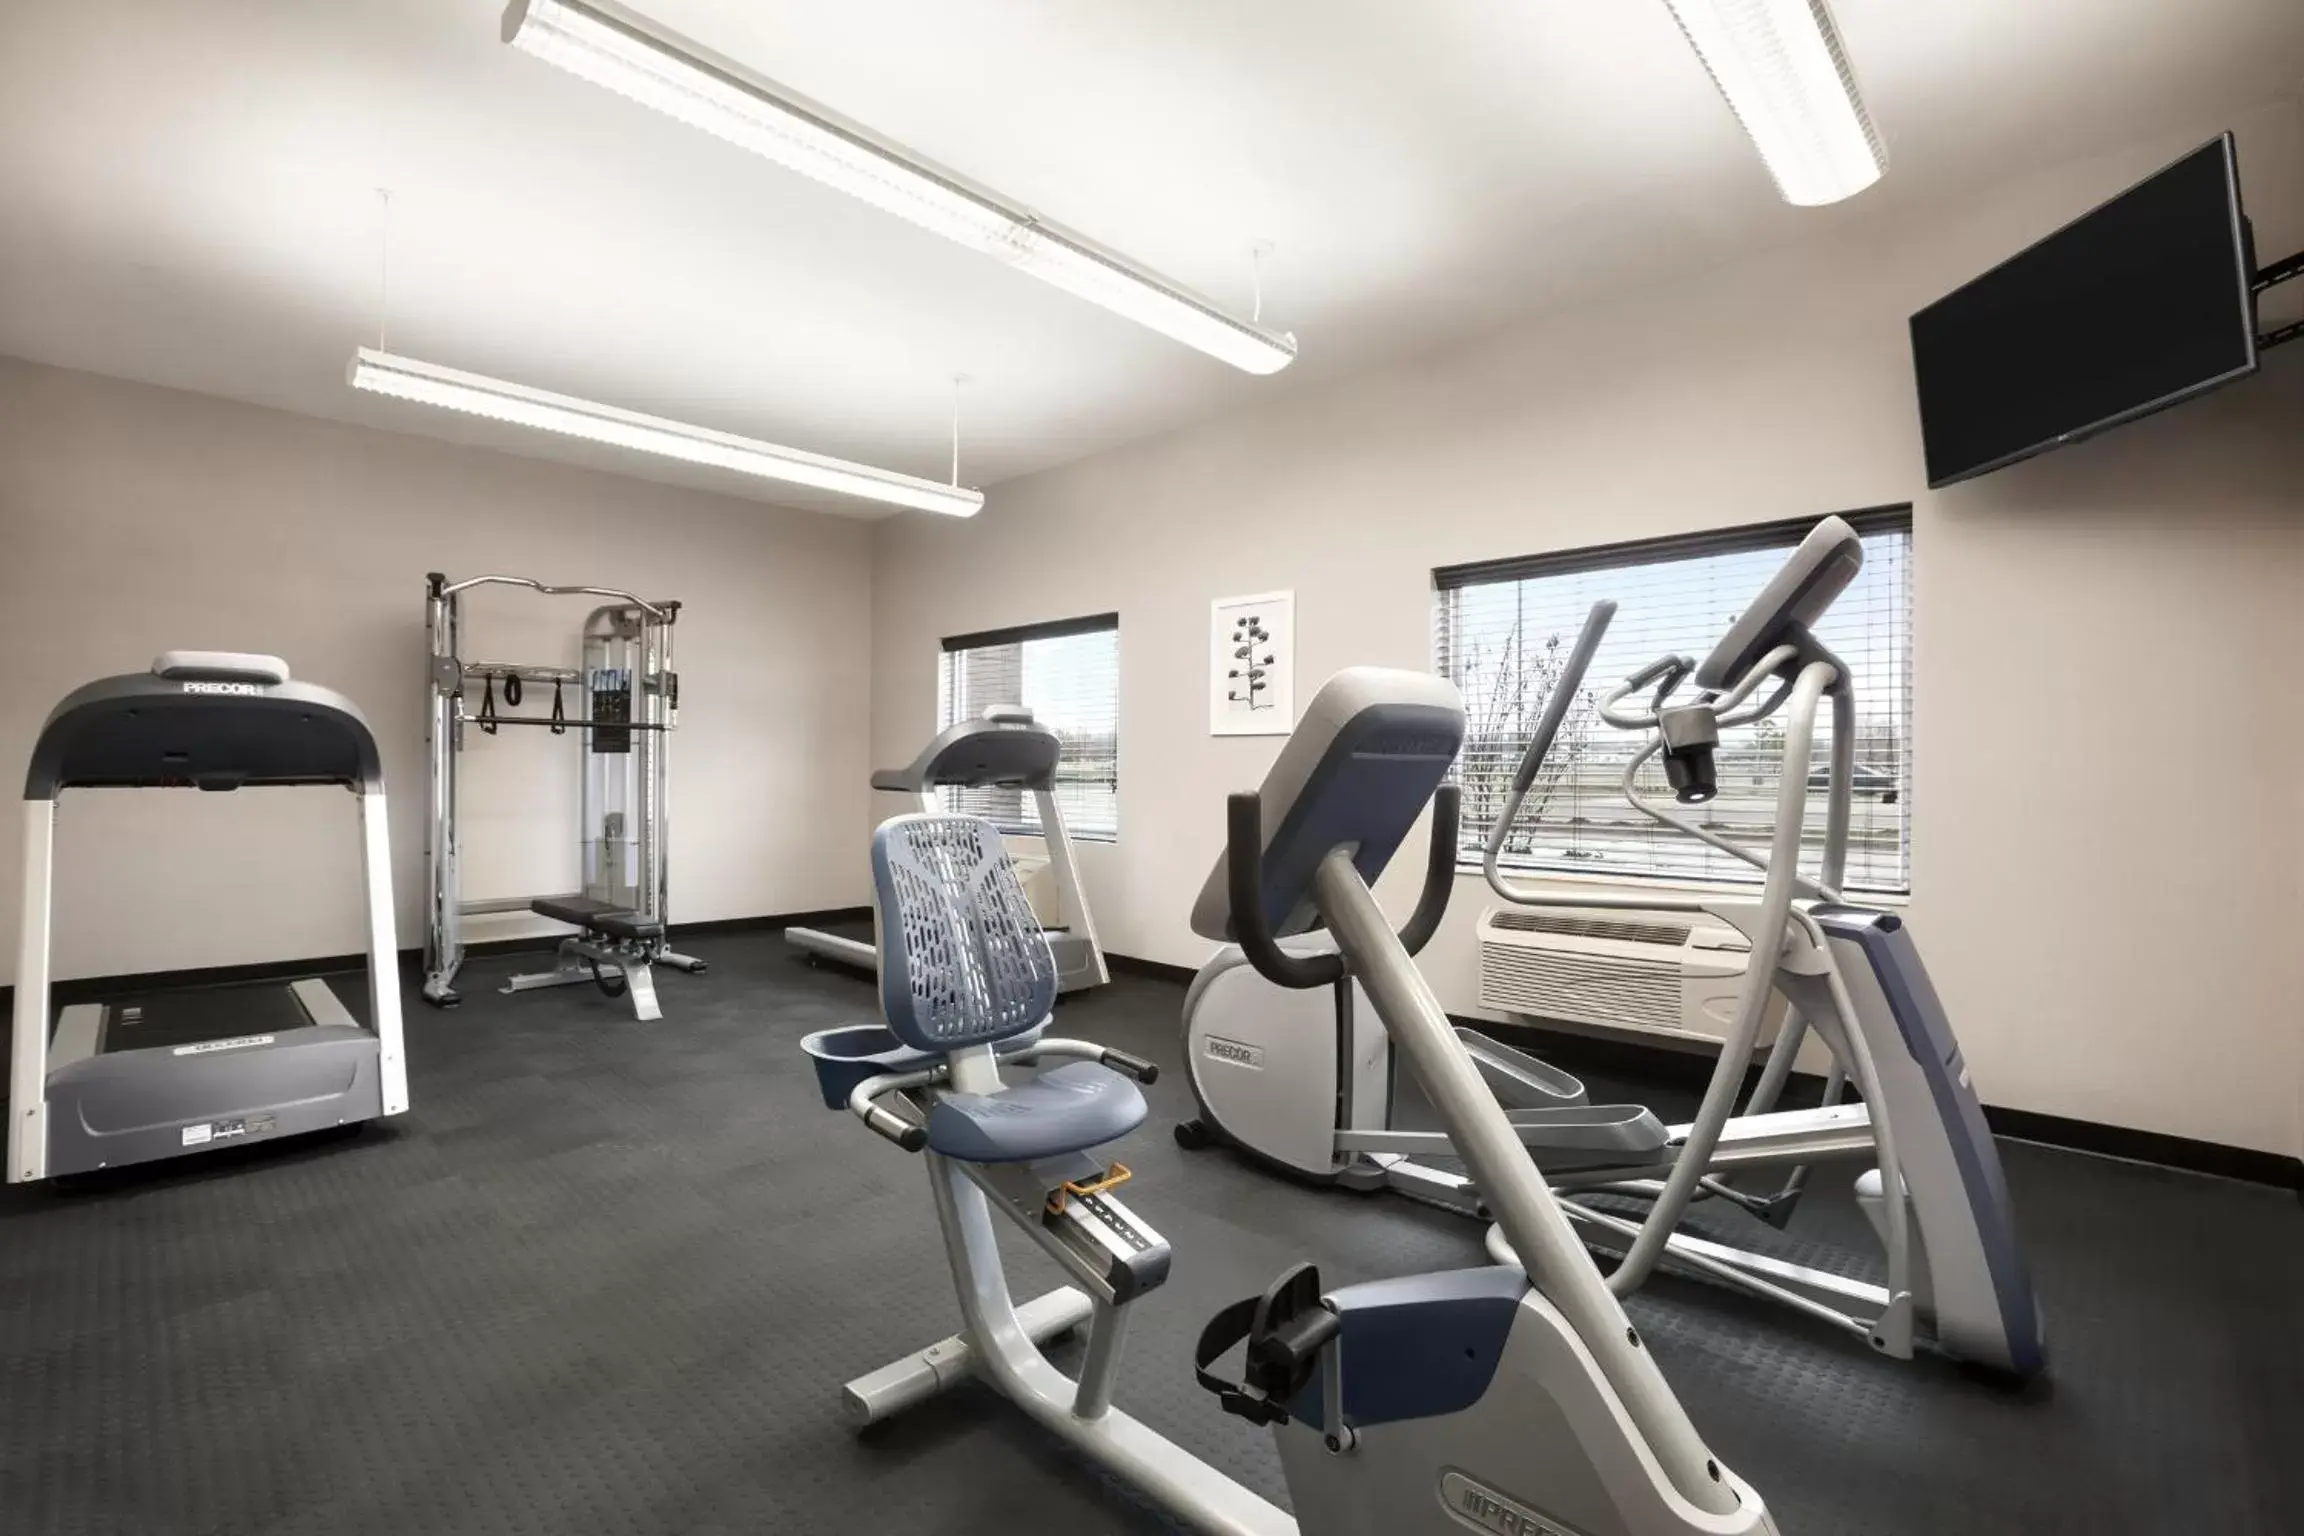 Fitness centre/facilities, Fitness Center/Facilities in Country Inn & Suites by Radisson, Enid, OK